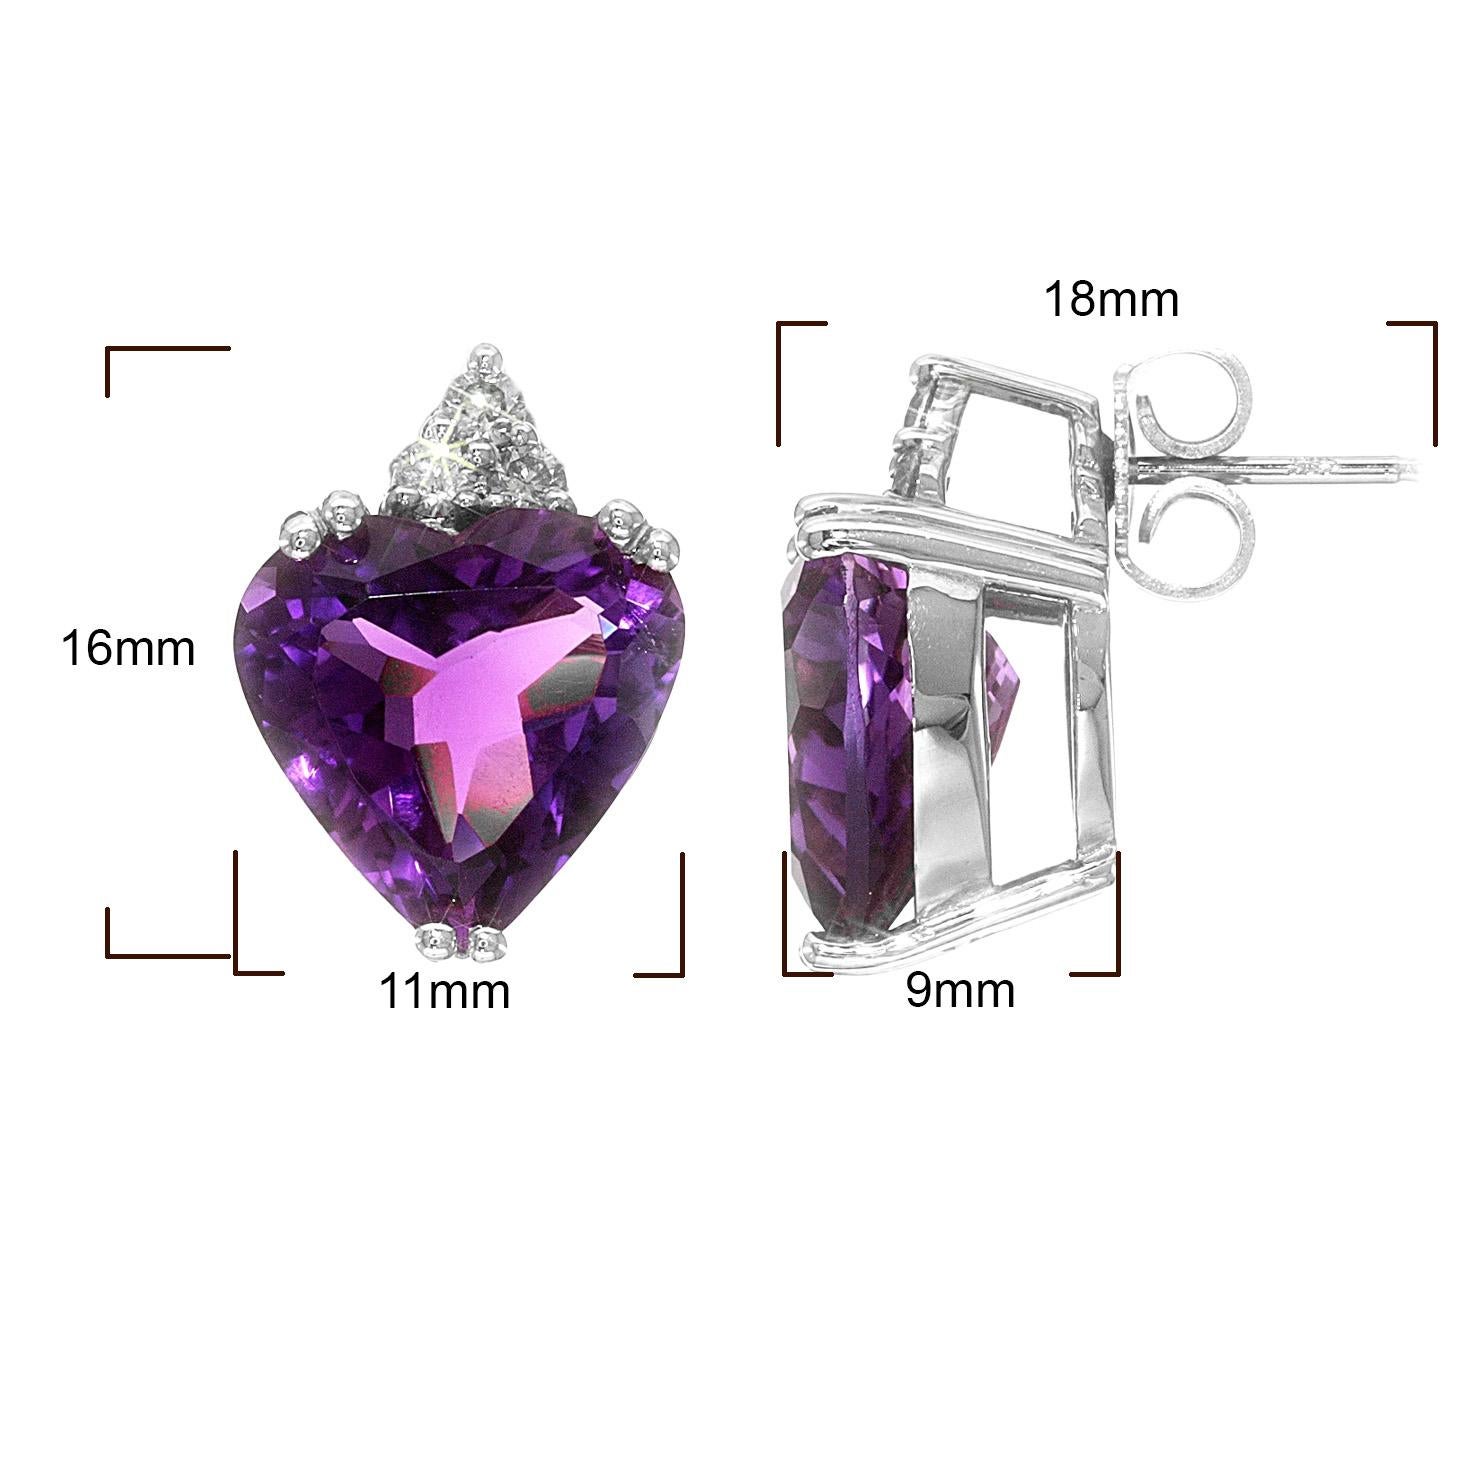 Natural Amethyst 7.98 Carats set in 14K White Gold Earrings with Diamonds For Sale 2